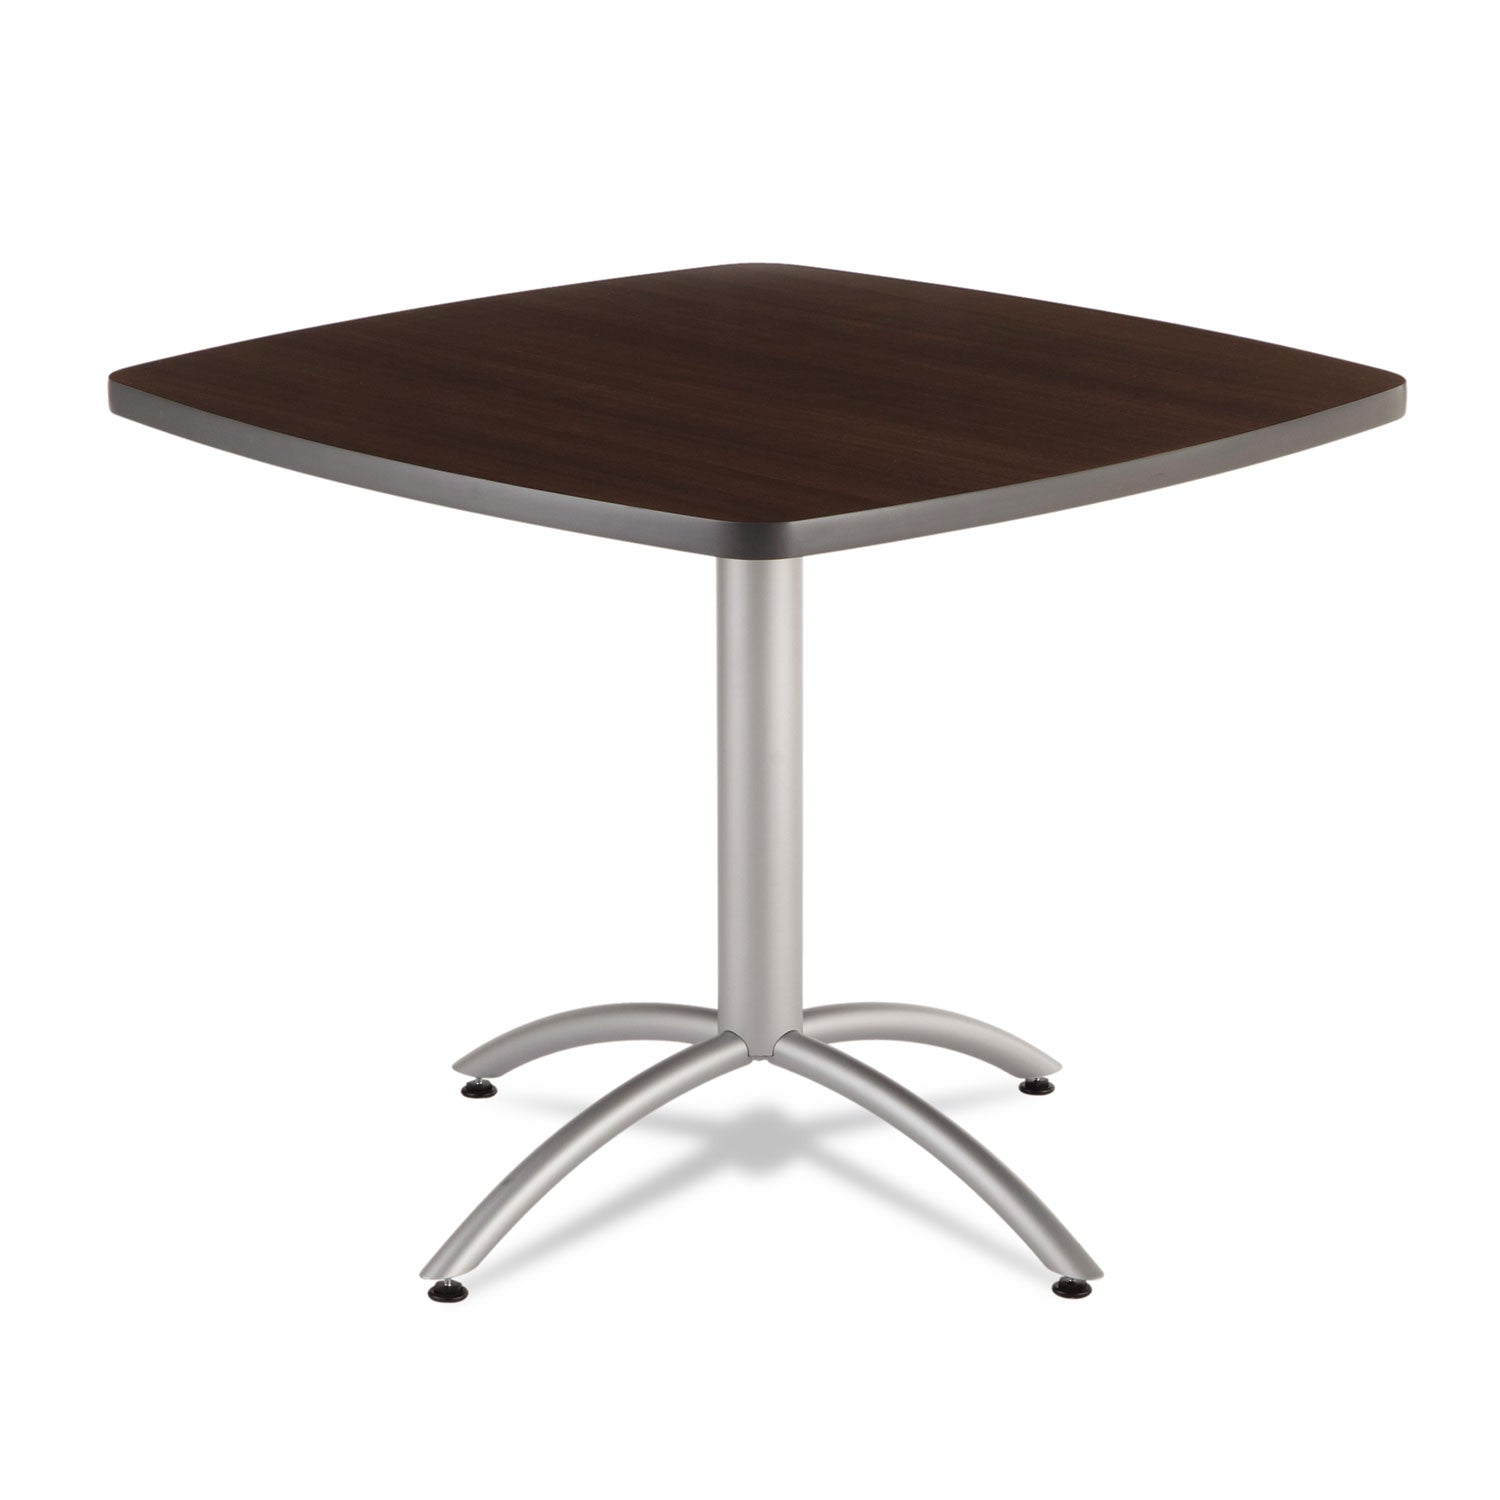 CafeWorks Cafe-Height Table, Square, 36" x 36" x 30", Walnut/Silver - 1